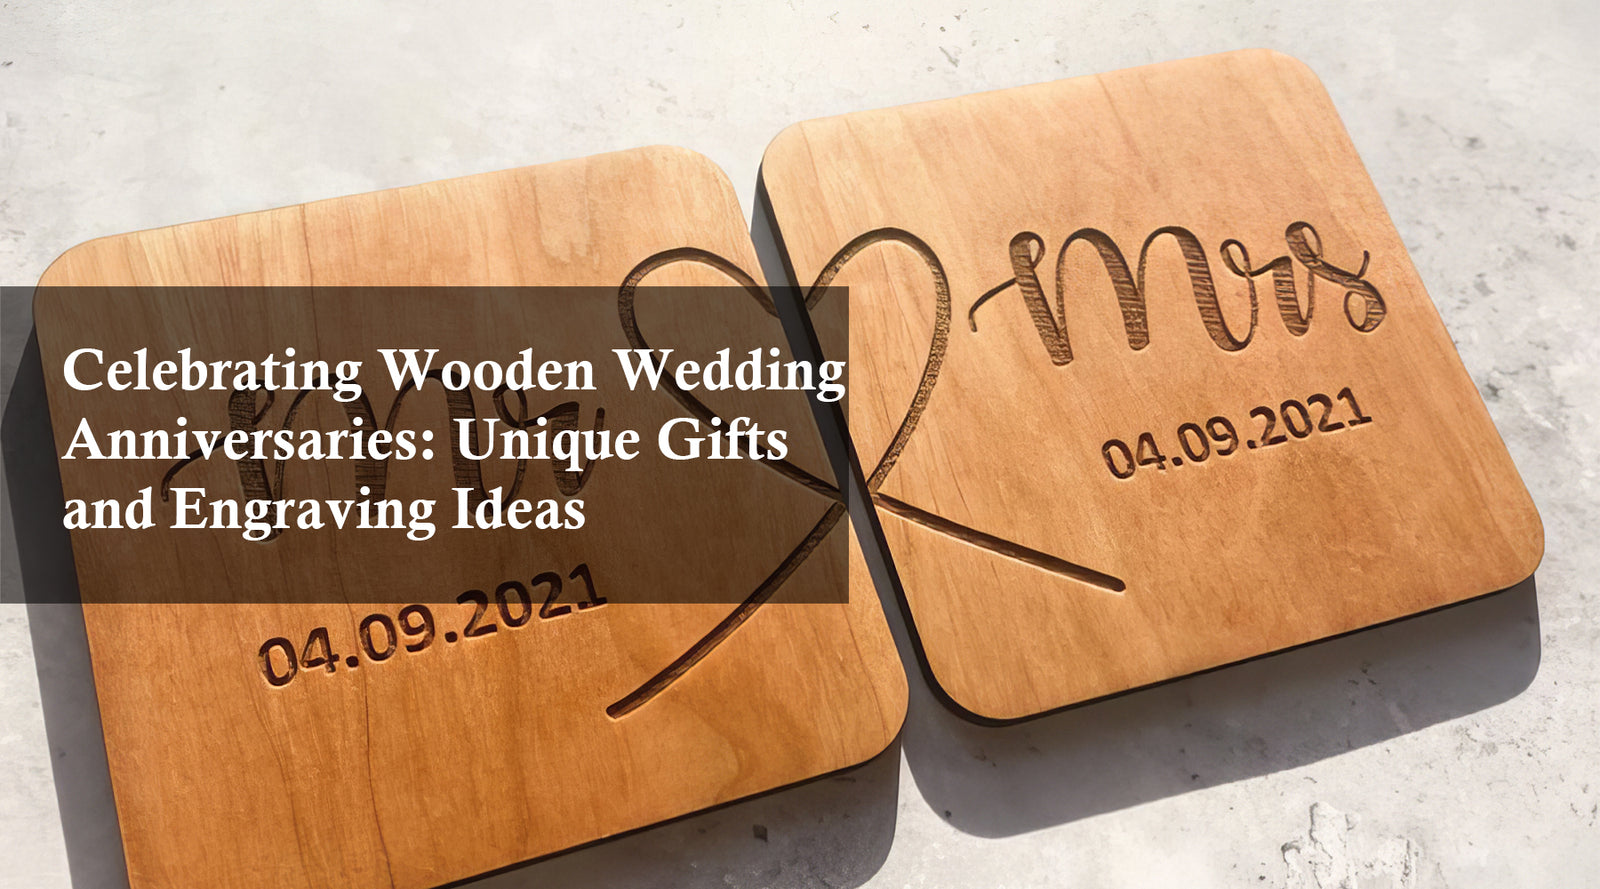 Celebrating Wooden Wedding Anniversaries: Unique Gifts and Engraving Ideas